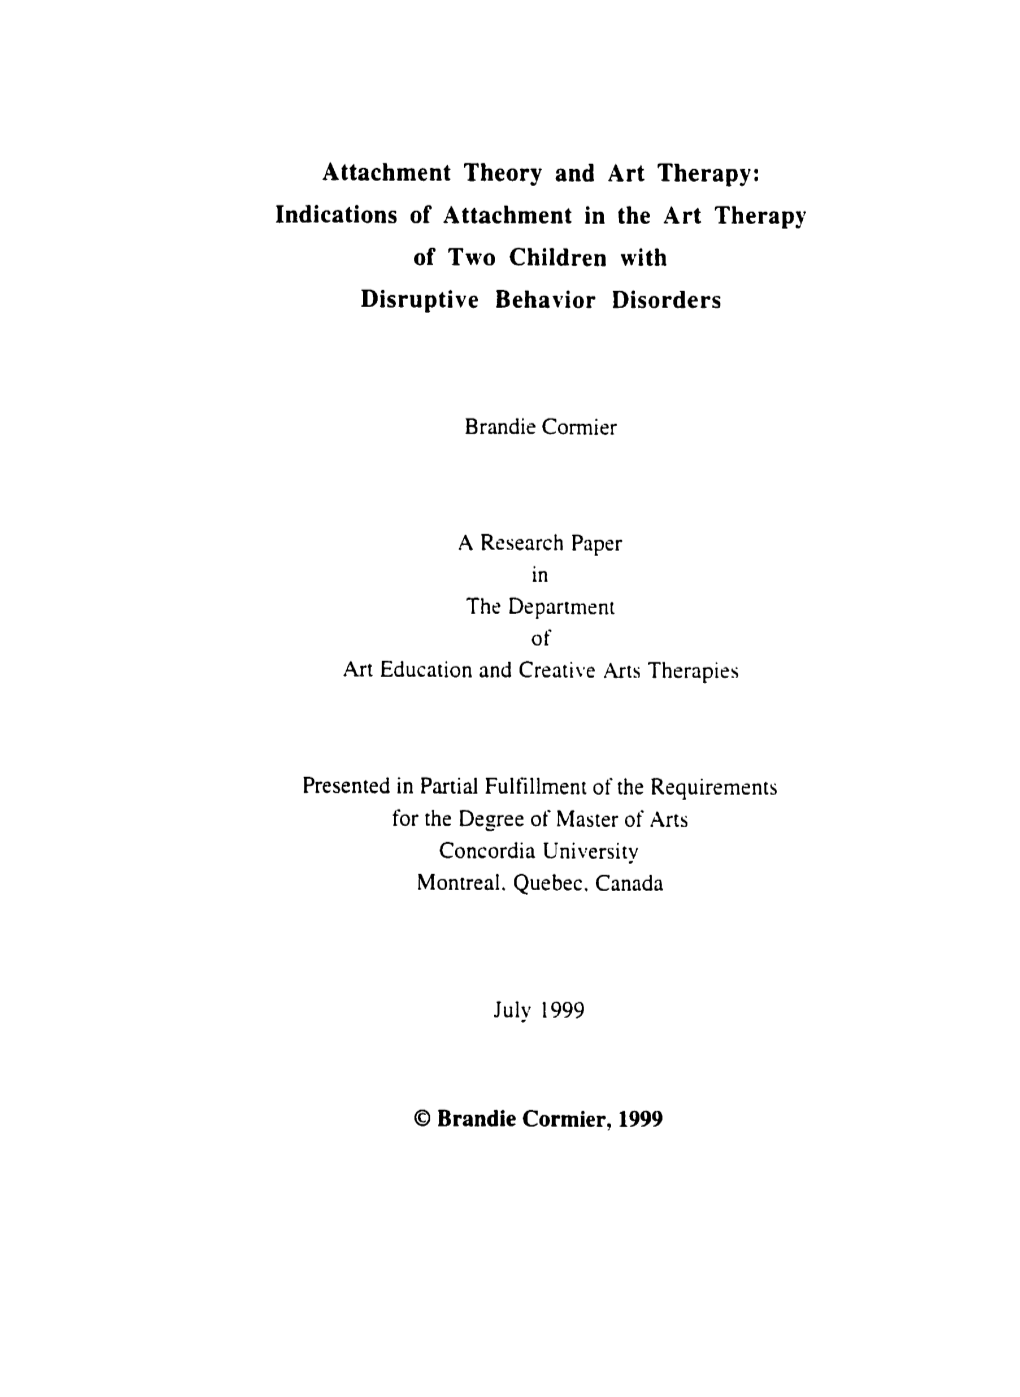 Attachment Theory and Art Therapy: Indications of Attachment in the Art Therapg of Two Children with Disruptive Behavior Disorders